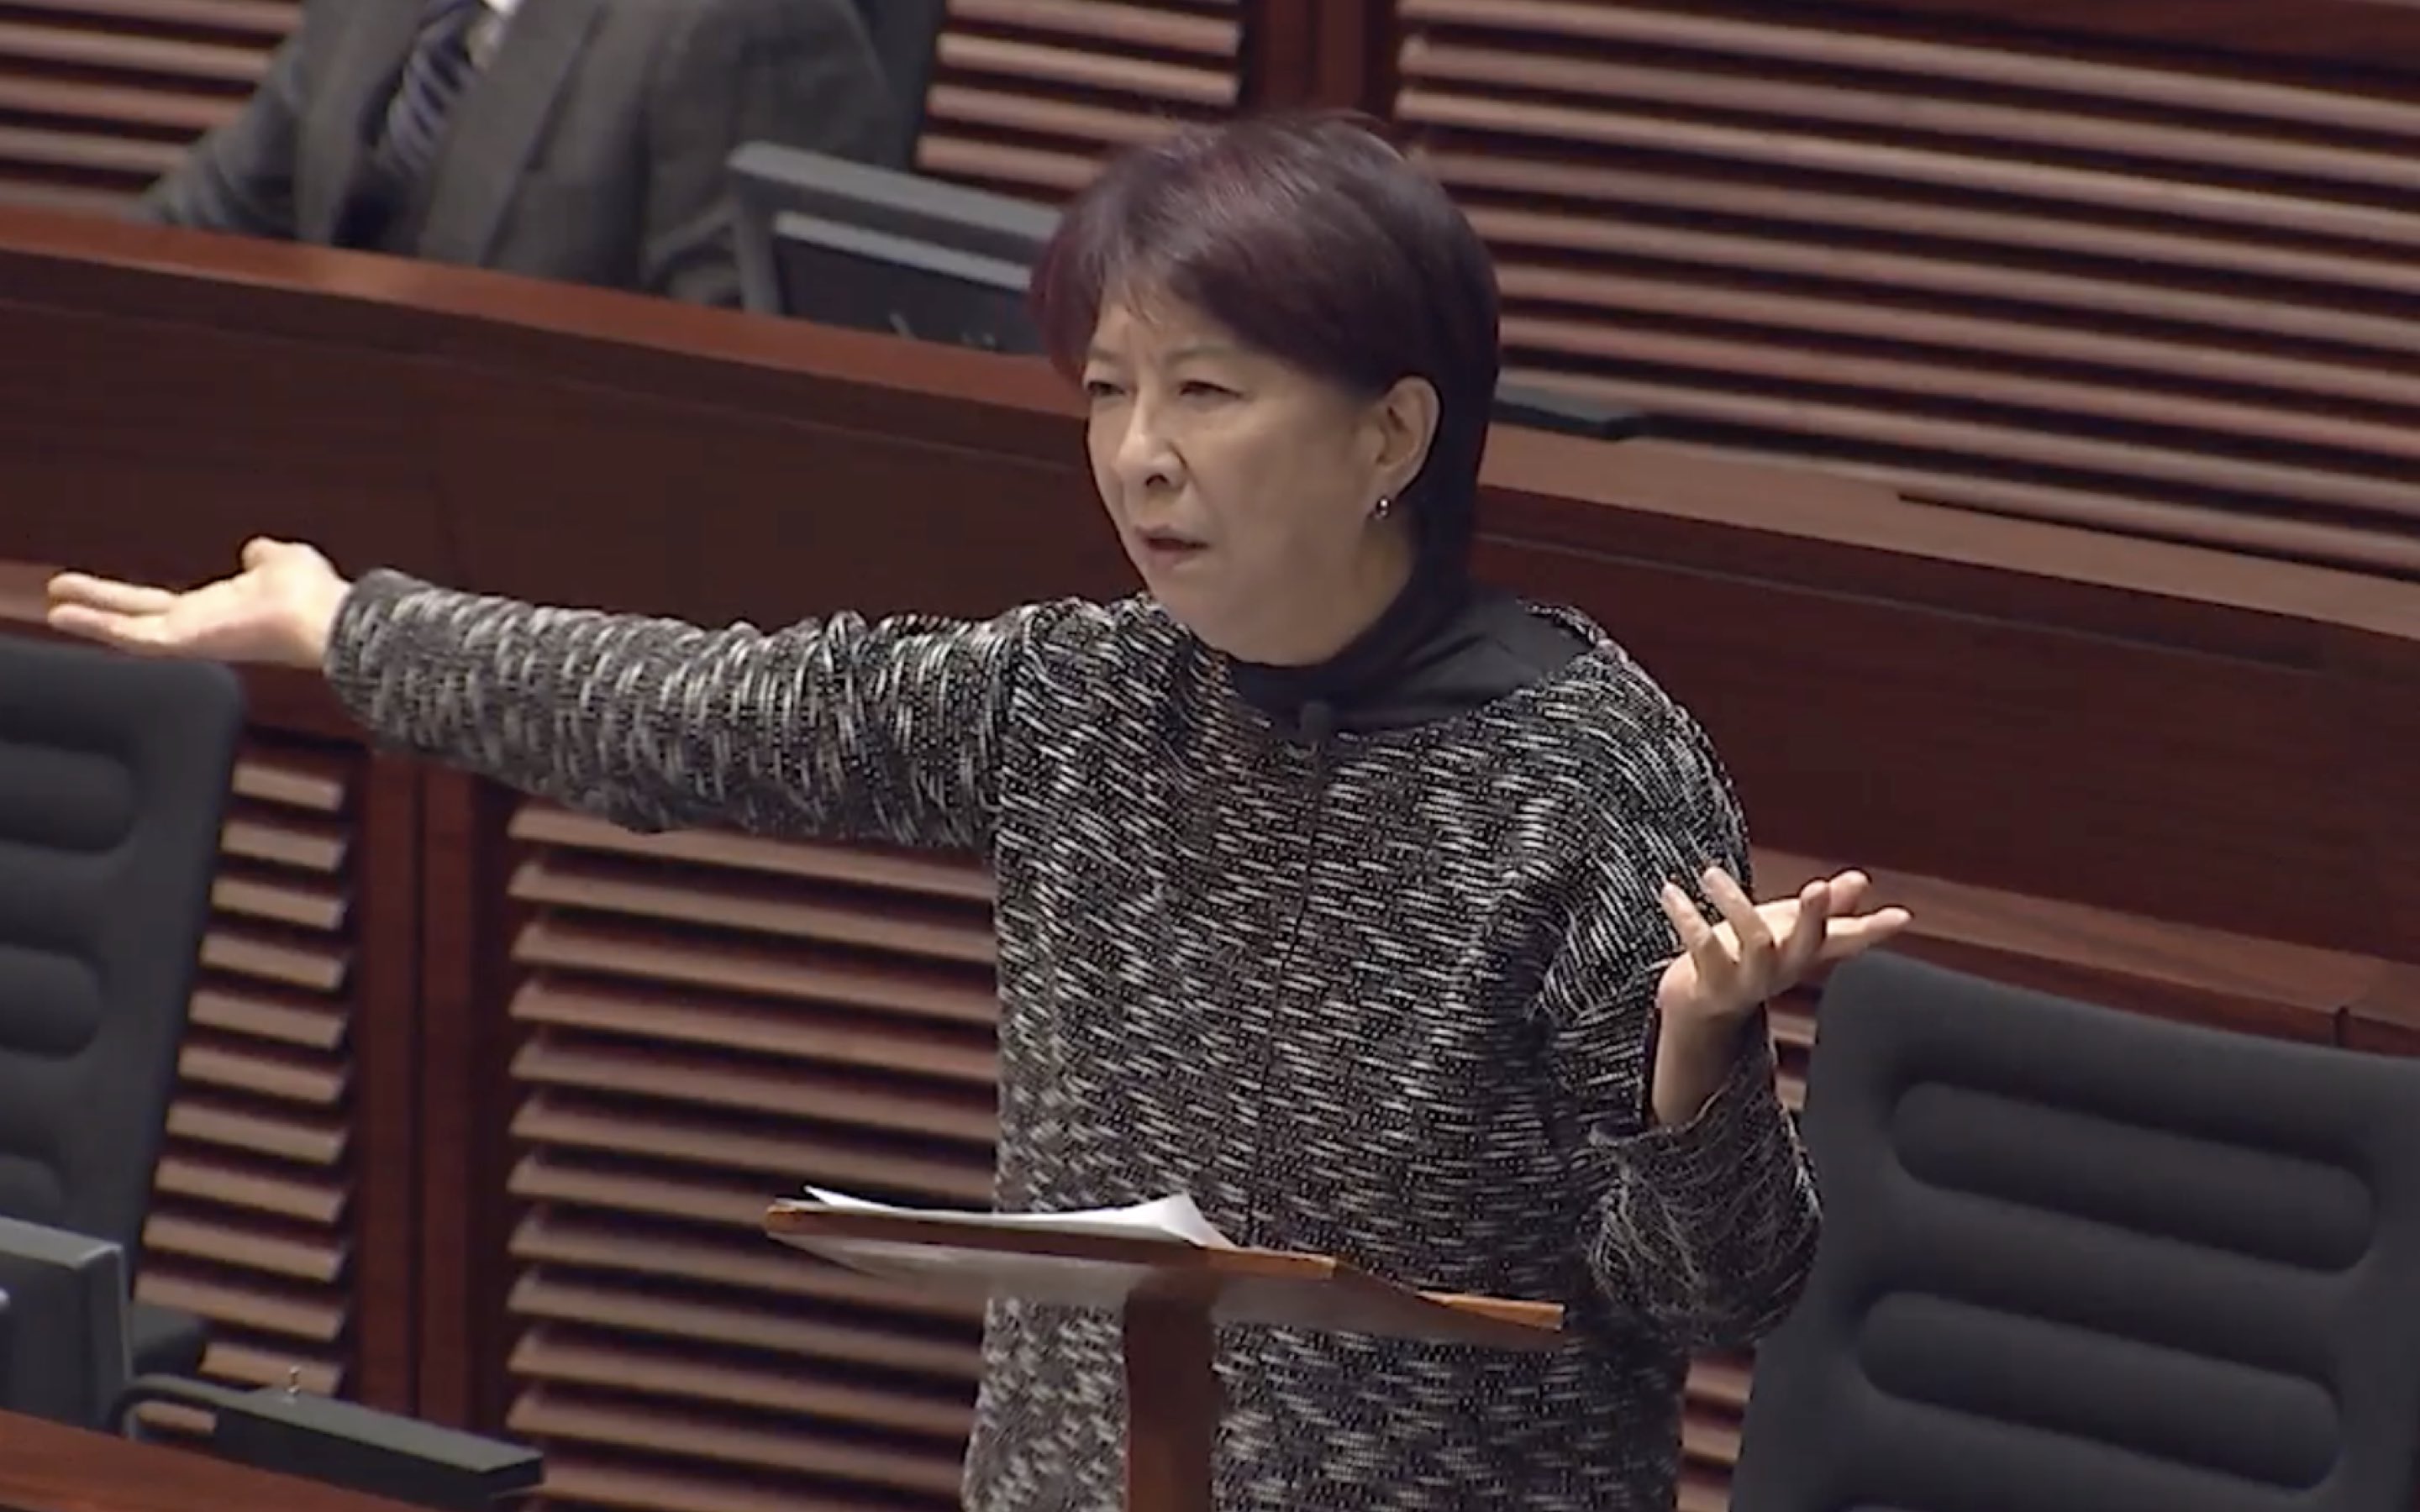 Pro-Beijing lawmaker Ann Chiang declaring in LegCo that she’s never heard of a case involving a police officer raping someone inside a police station, completely forgetting the fact that that was exactly what happened at a police station in Mong Kok in 2008. Screengrab via Facebook video.